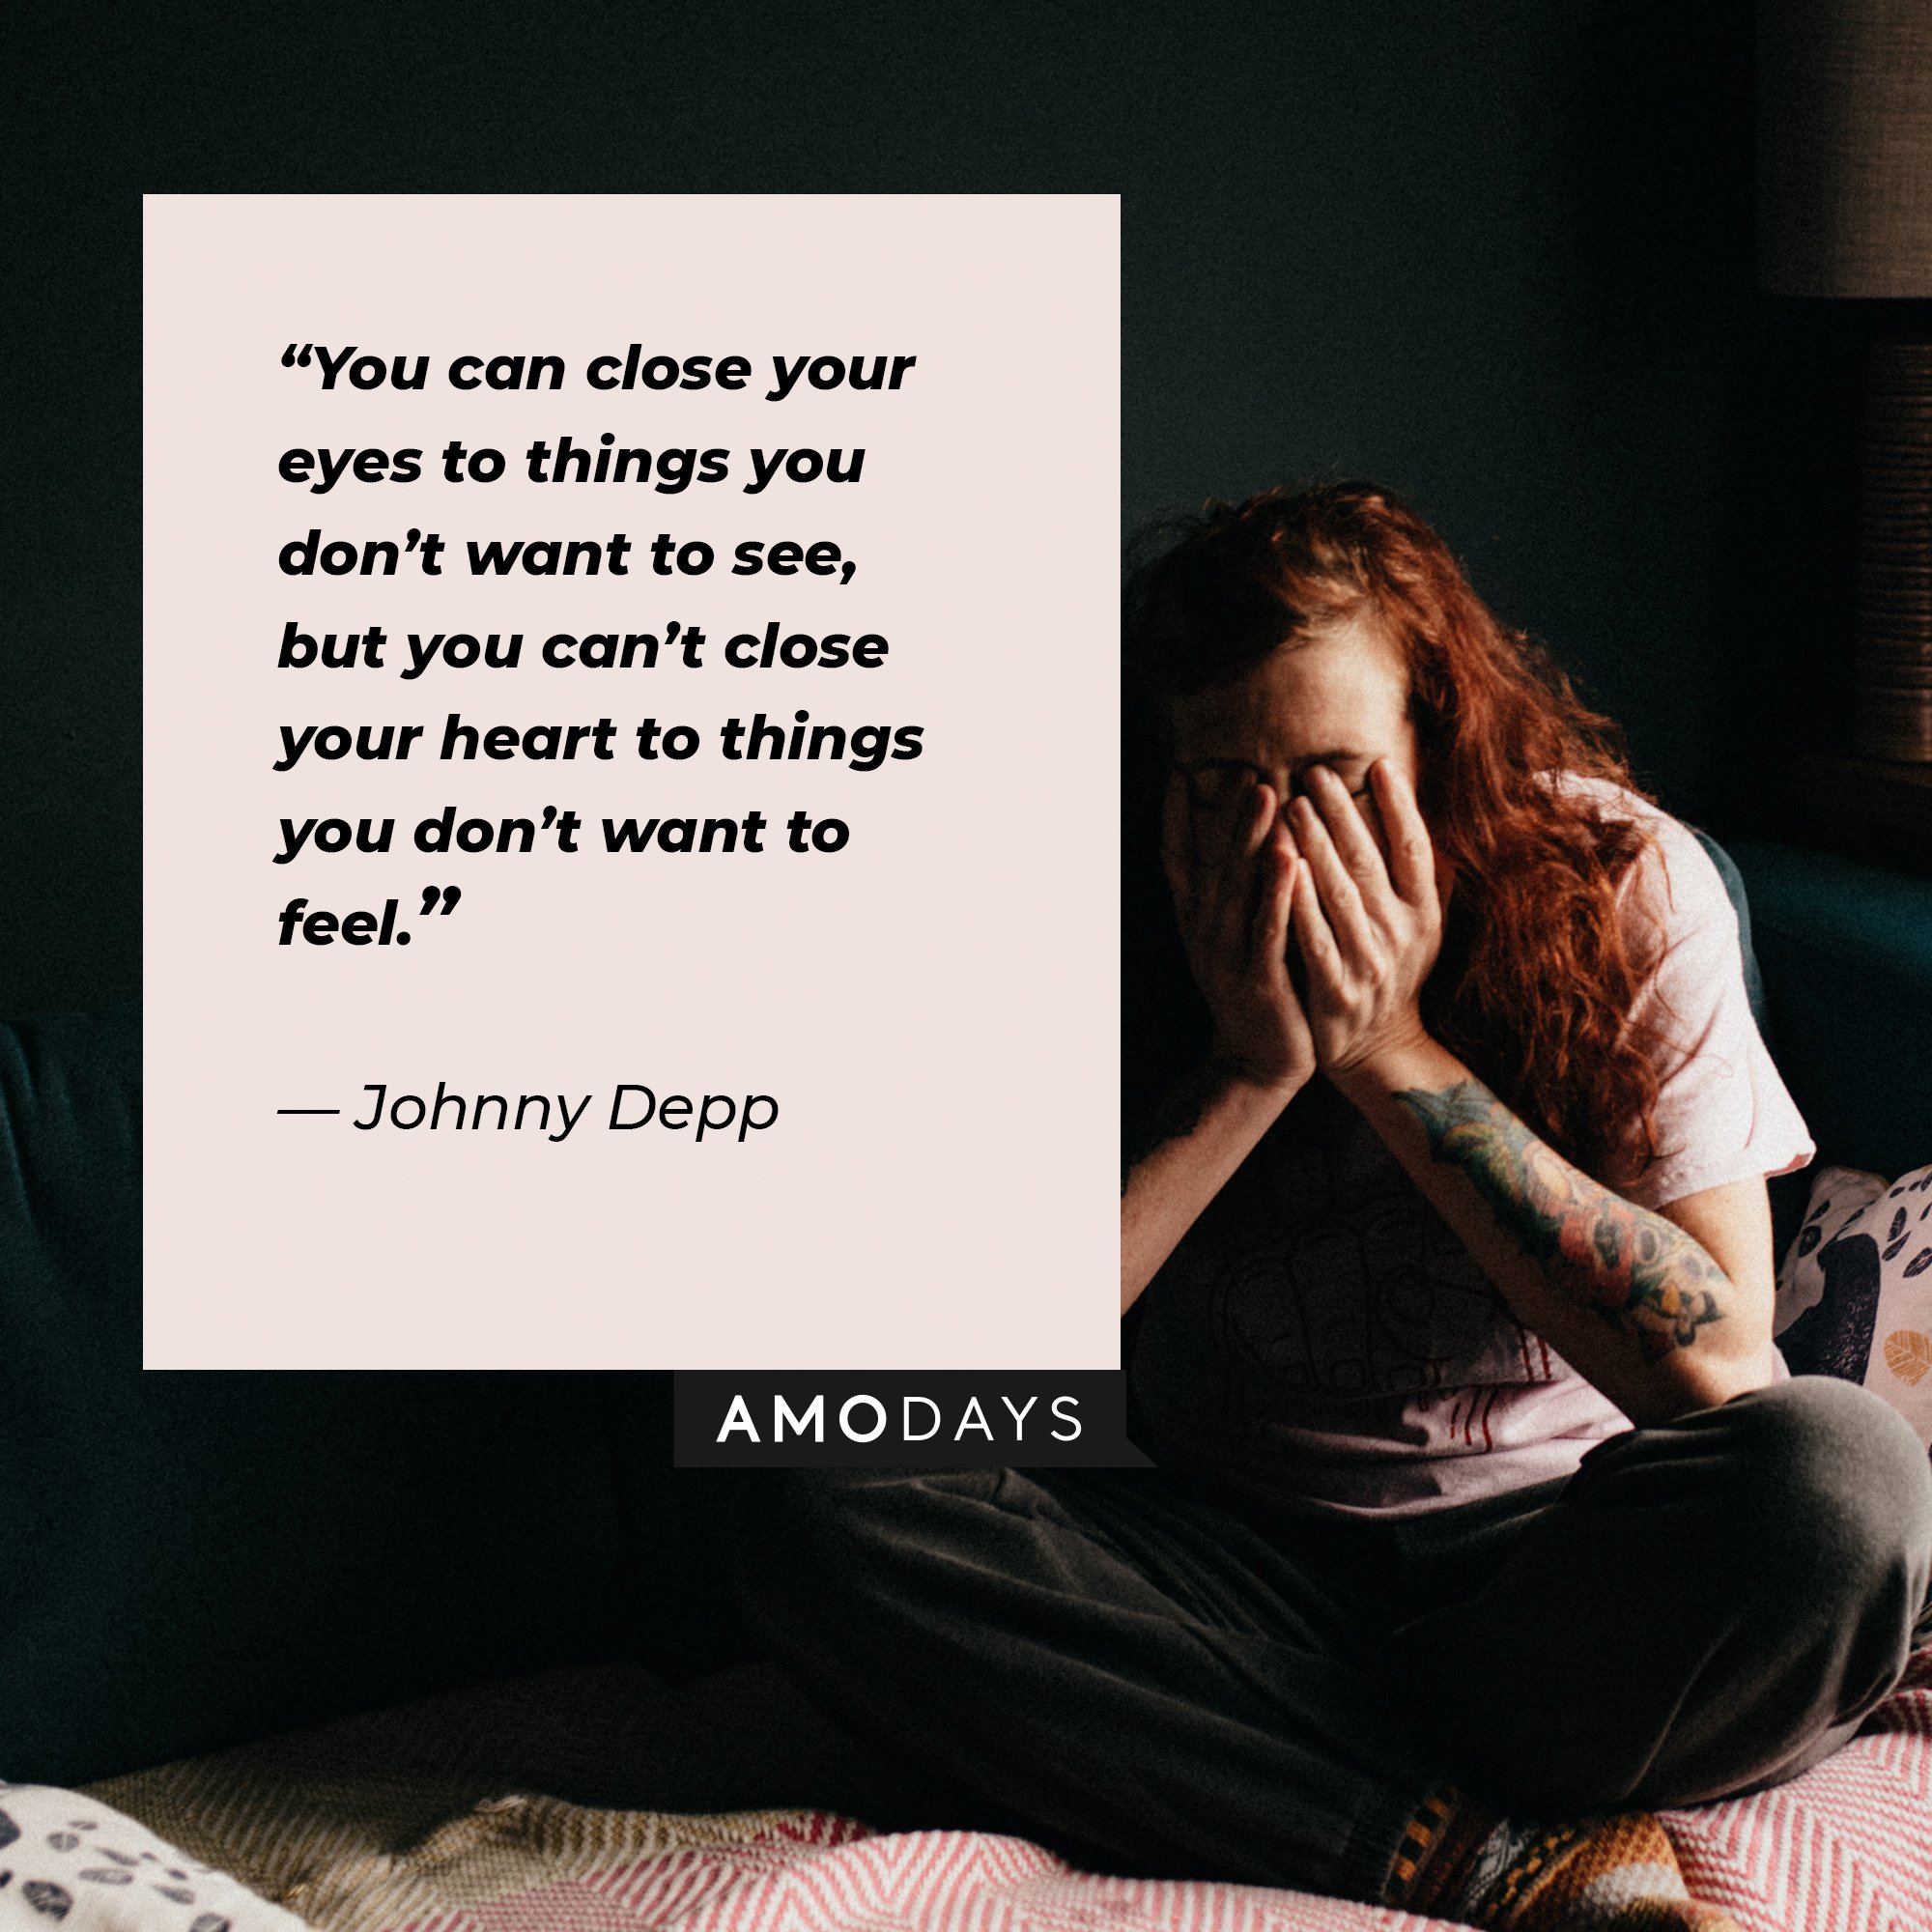 Johnny Depp’s quote: “You can close your eyes to things you don’t want to see, but you can’t close your heart to things you don’t want to feel.” | Image: AmoDays